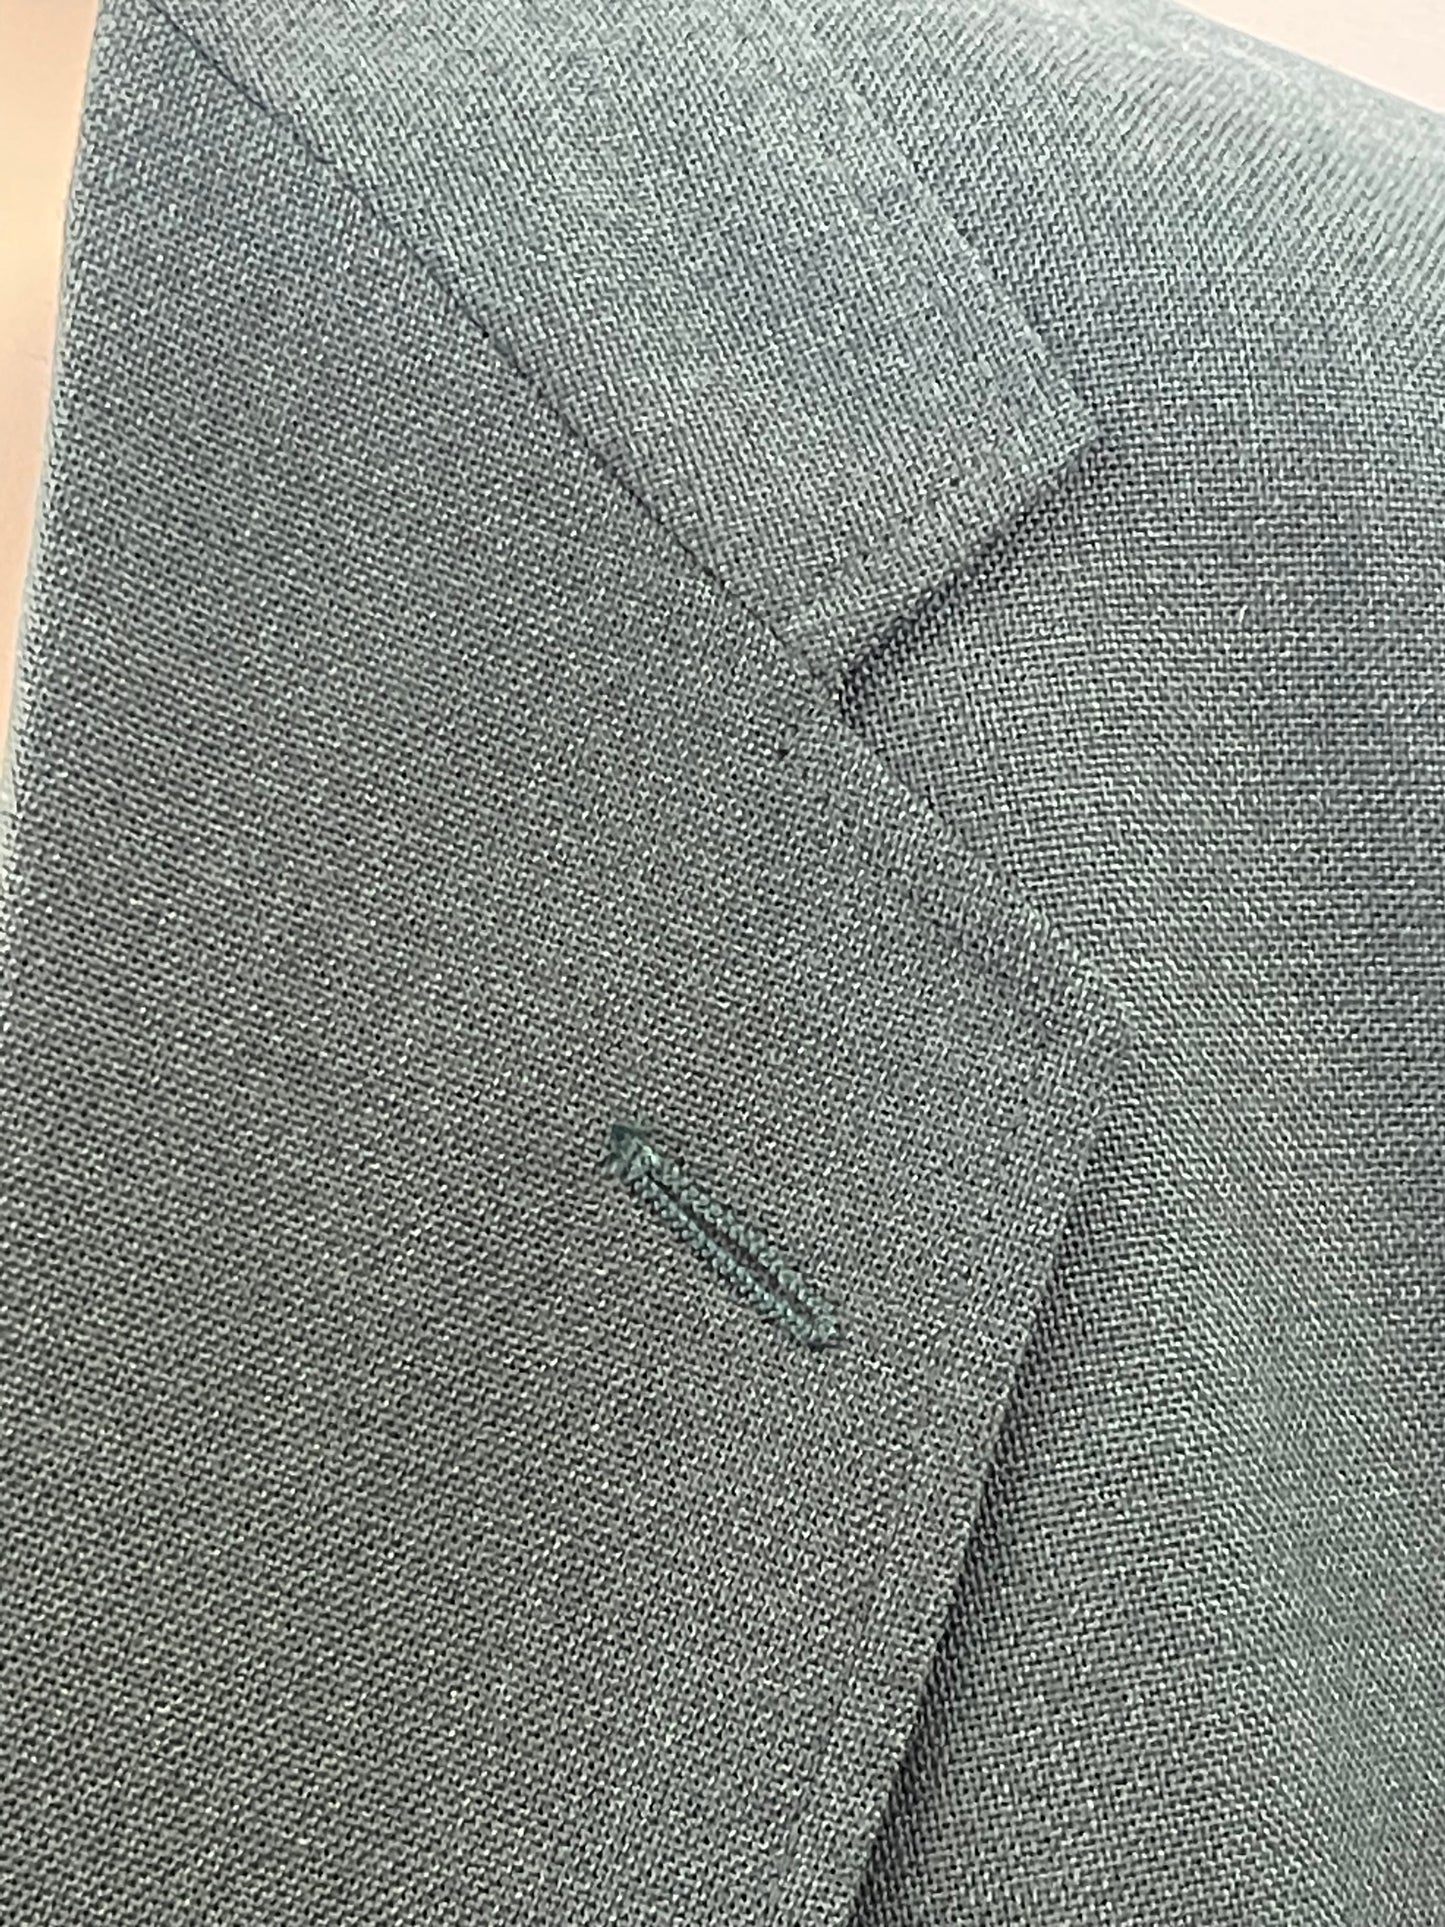 Stanford Forest Green Suit Coat